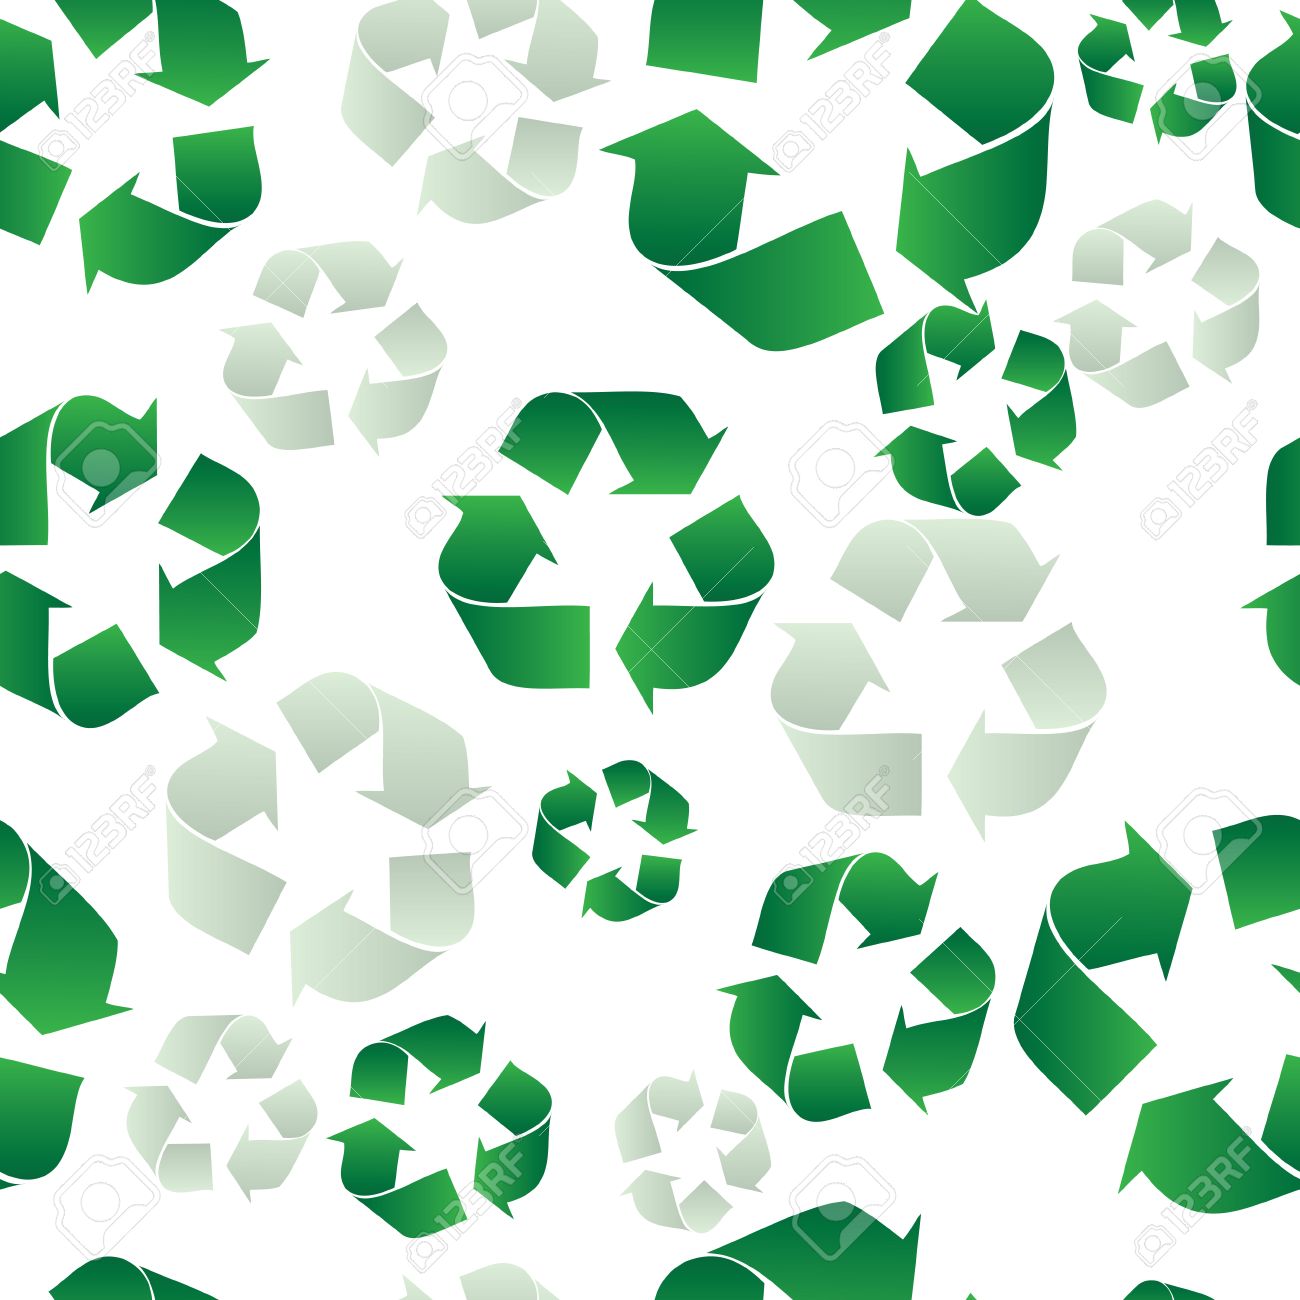 A Seamless Tiled Green Ecology Recycling Background On White